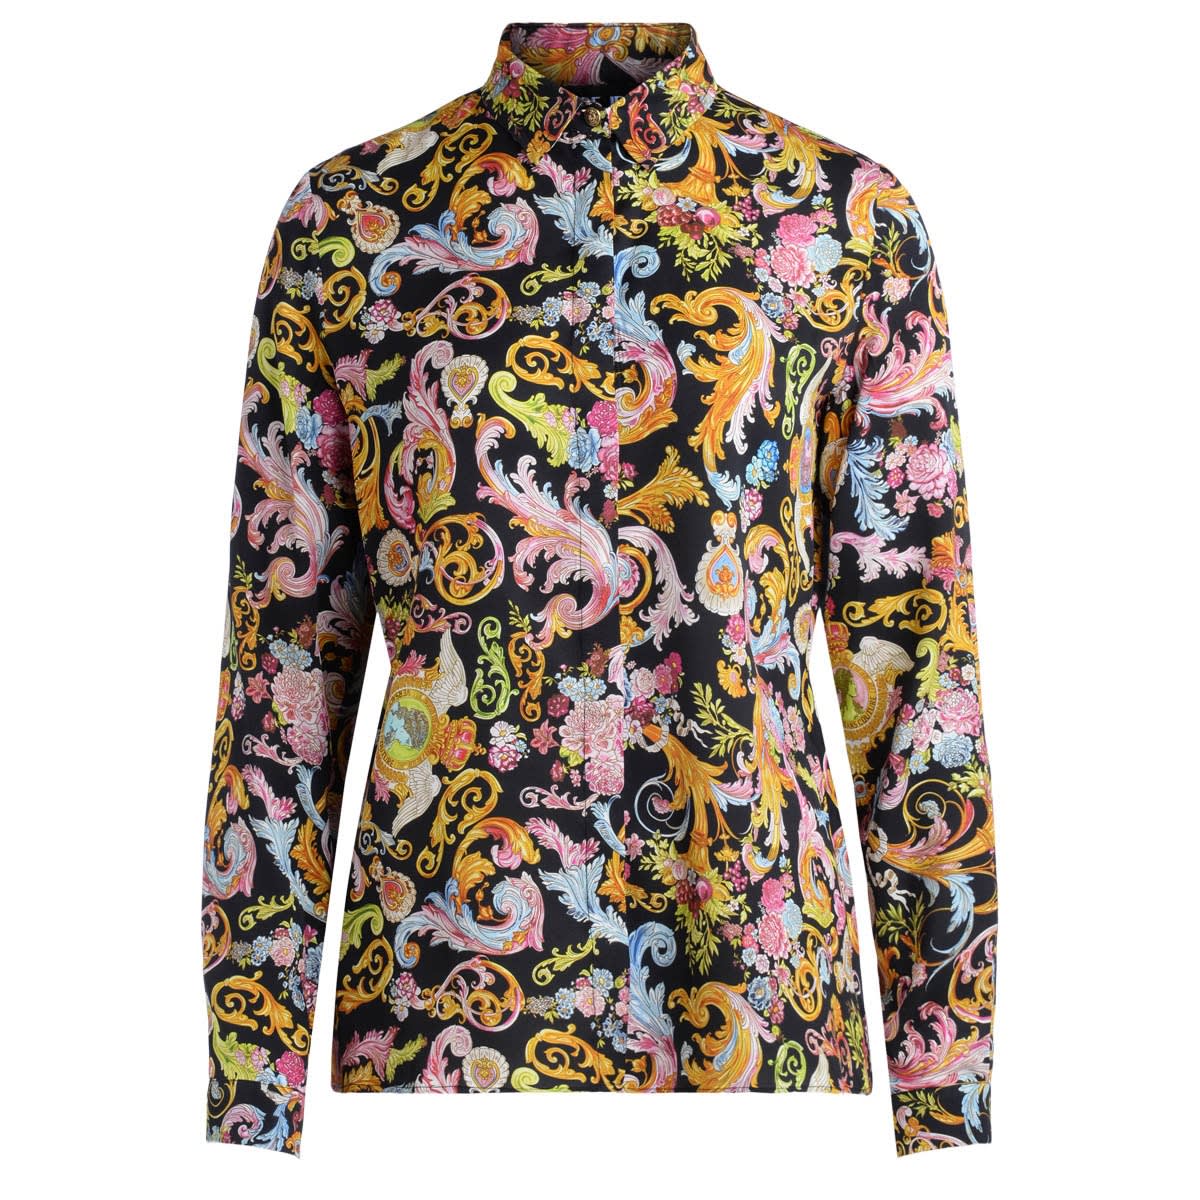 VERSACE JEANS COUTURE SHIRT WITH VERSAILLES PRINT,B0.HWA628.S0879-899